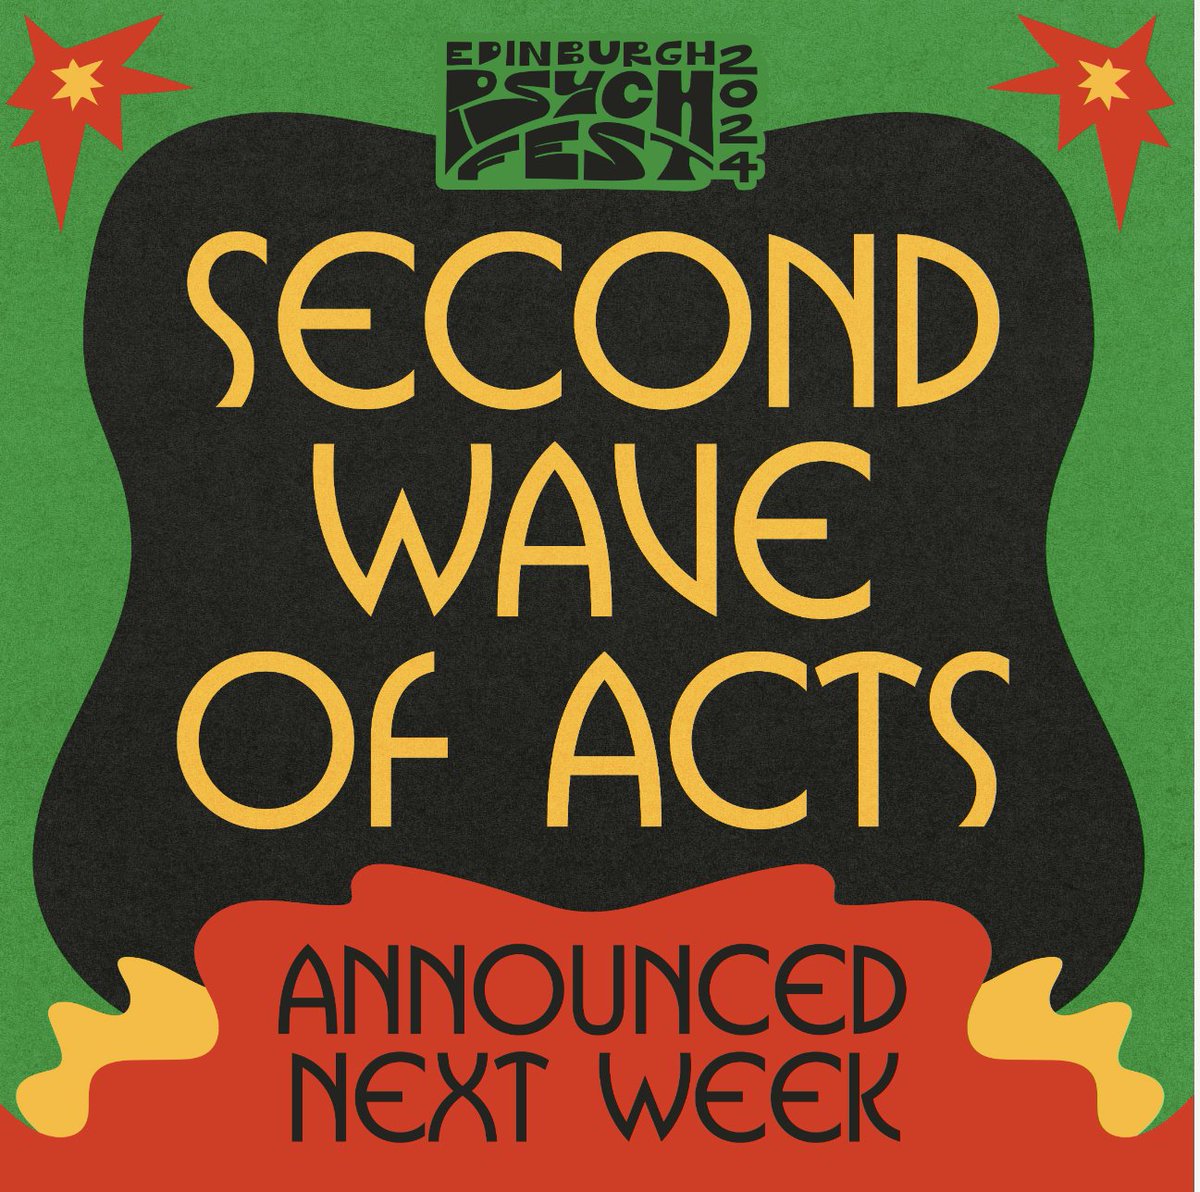 Second wave of acts coming next week ... edinburghpsychfest.com